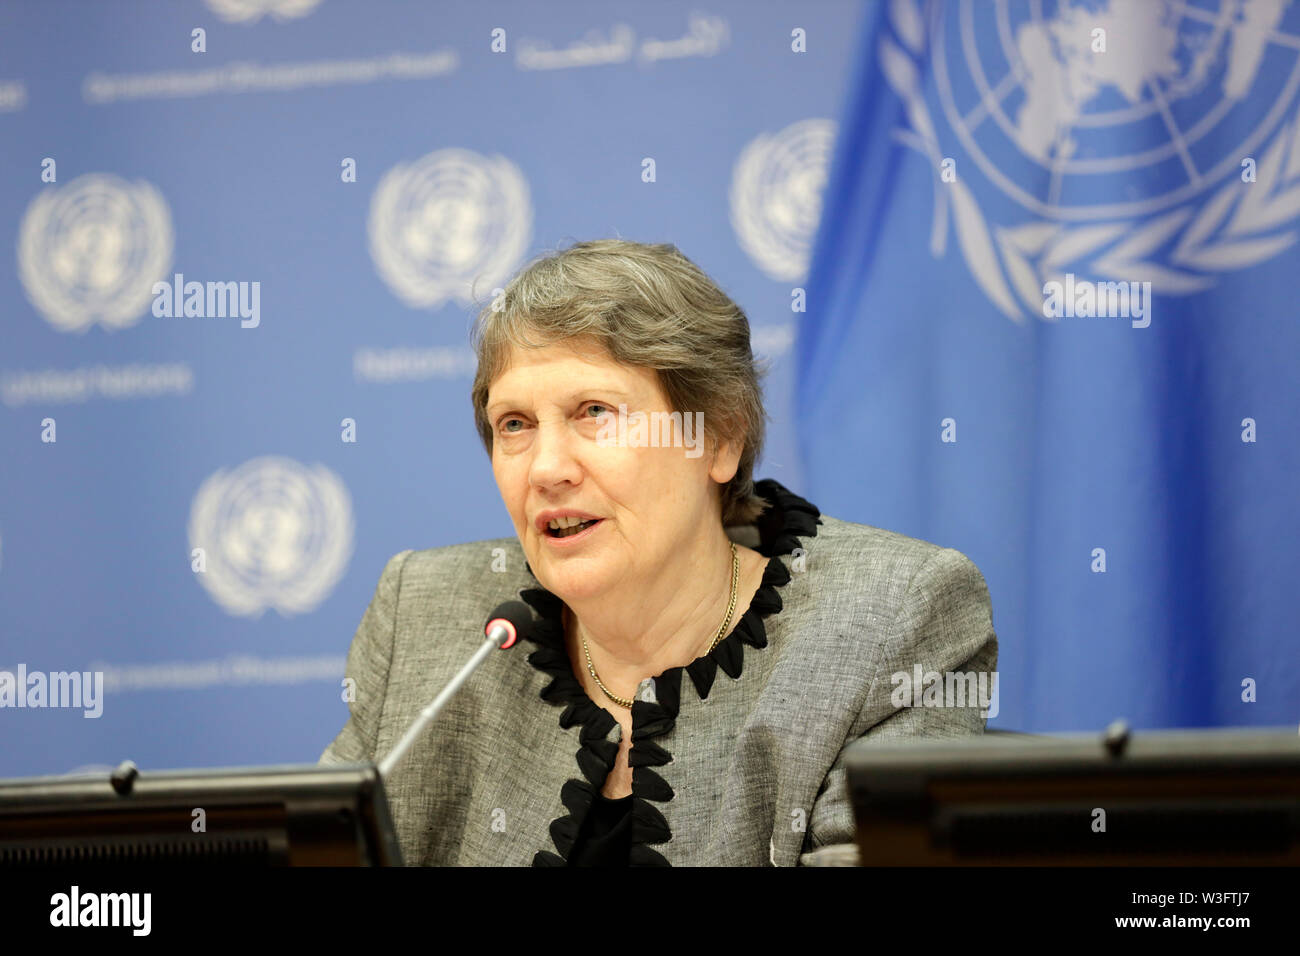 United Nations, UN headquarters in New York. 15th July, 2019. Former Prime Minister of New Zealand Helen Clark speaks to journalists during a press briefing on gender equality and women's leadership for a sustainable world, at the UN headquarters in New York, July 15, 2019. UN General Assembly President Maria Fernanda Espinosa Garces on Monday called on the international community to support women's rights and empowerment. Credit: Li Muzi/Xinhua/Alamy Live News Stock Photo